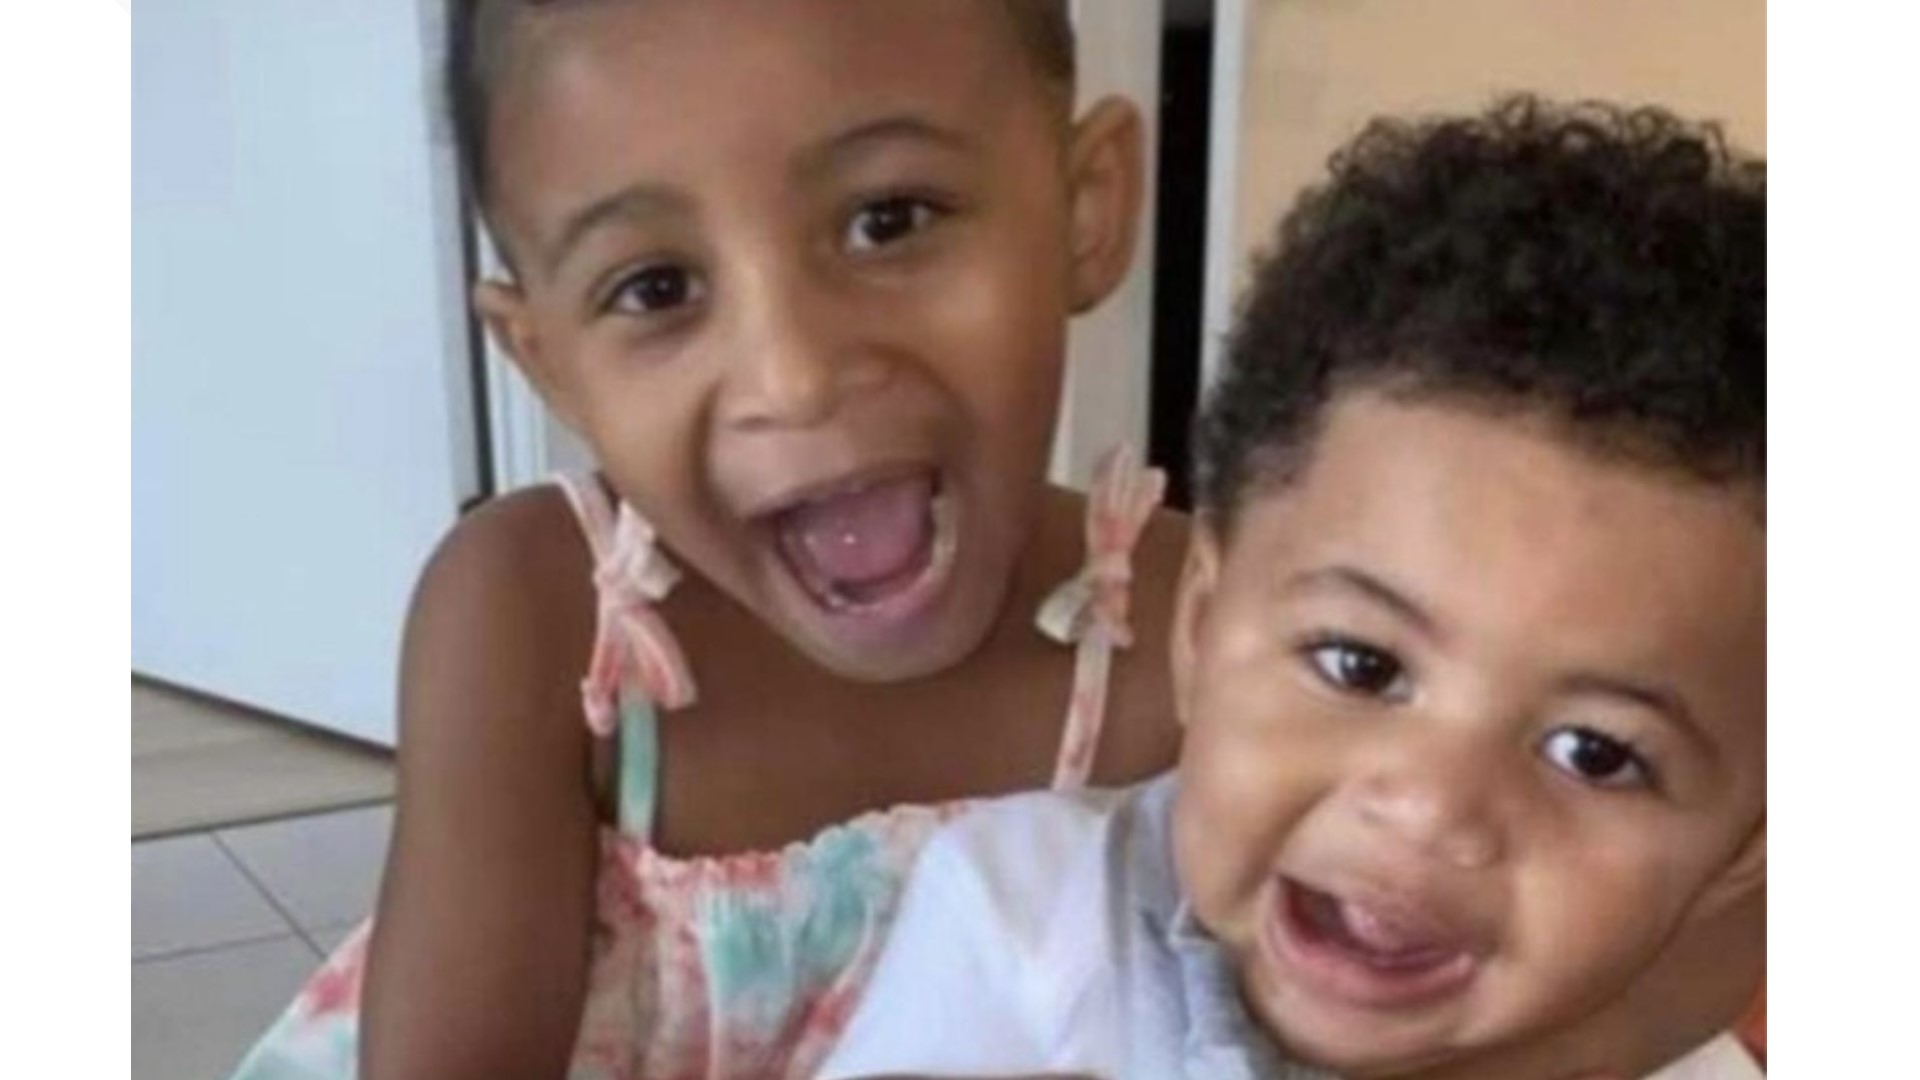 A four-year-old girl was killed and a two-year boy is hospitalized. Their mother stands accused of the crime.